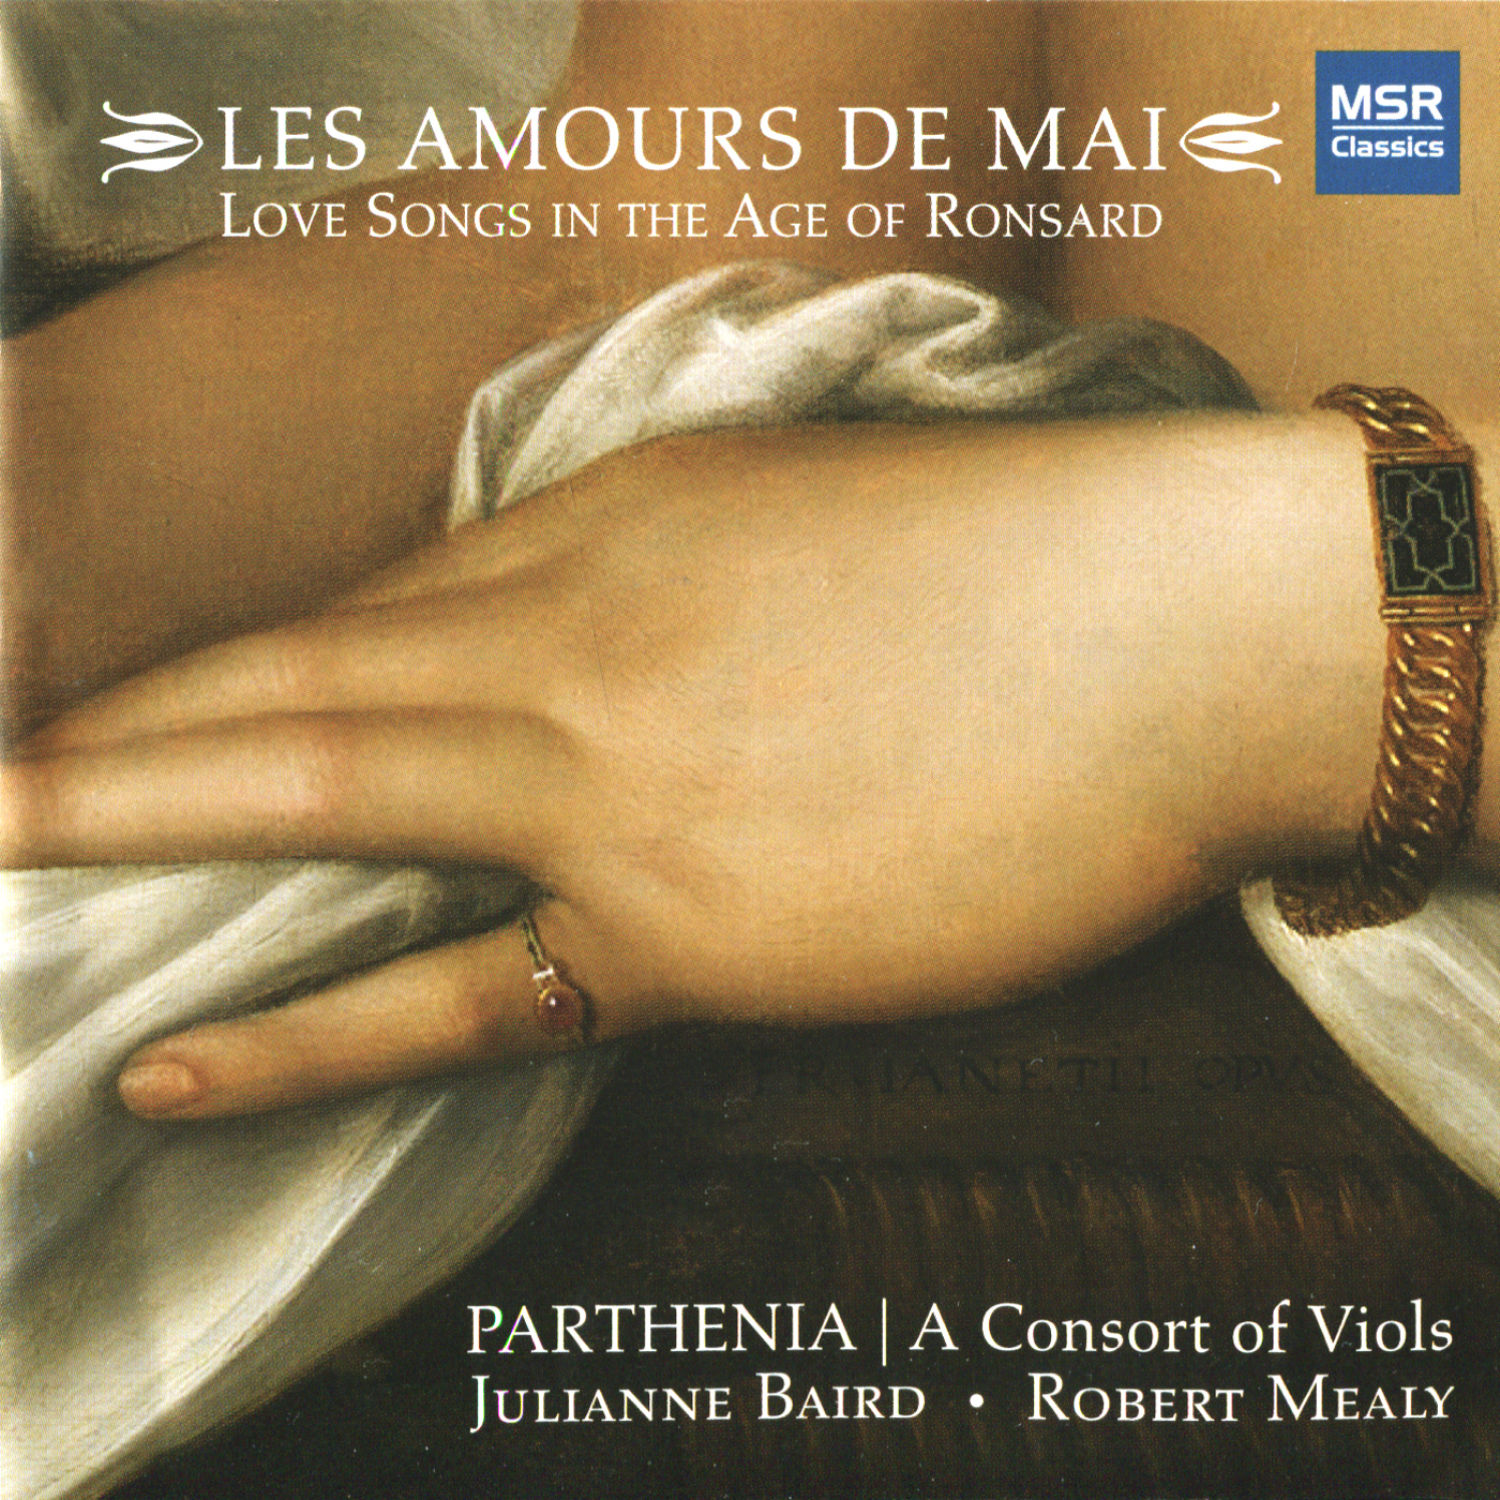 Ens. Parthenia Consort - Les Amours de Mai - Love Songs in the Age of Ronsard